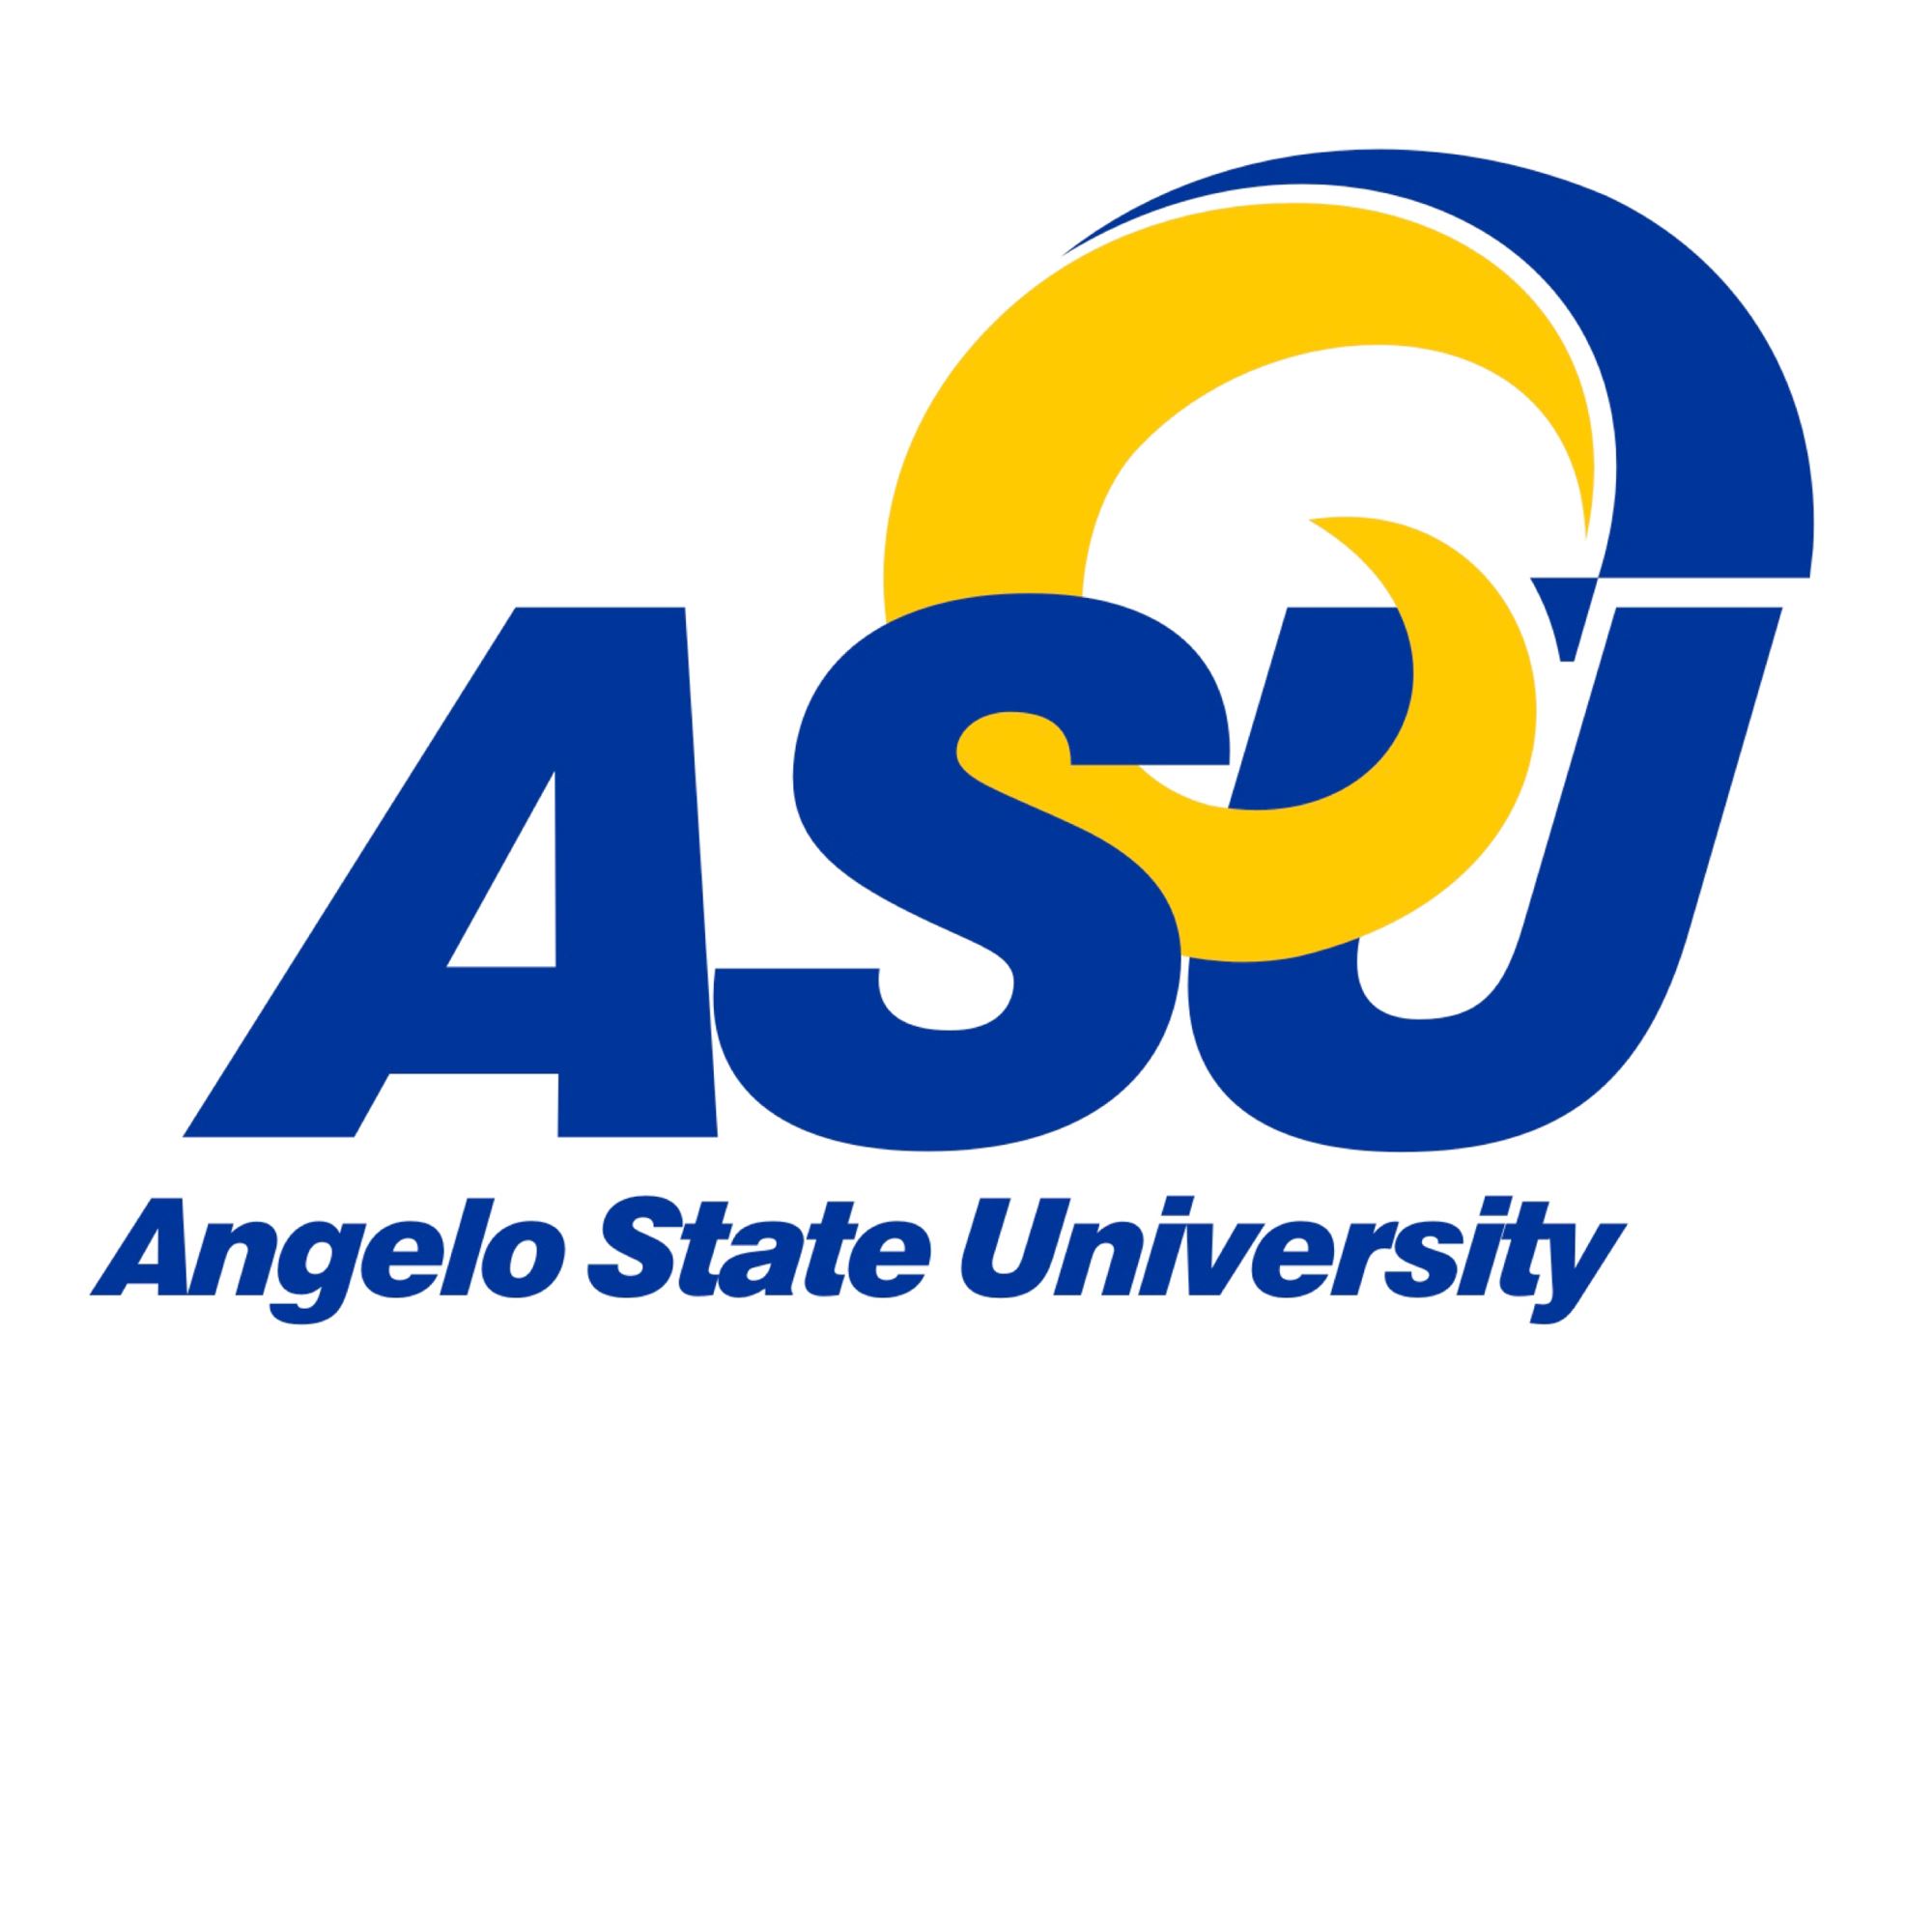 Angelo State University Logo with their abbreviation and a blue and yellow decorative swirl